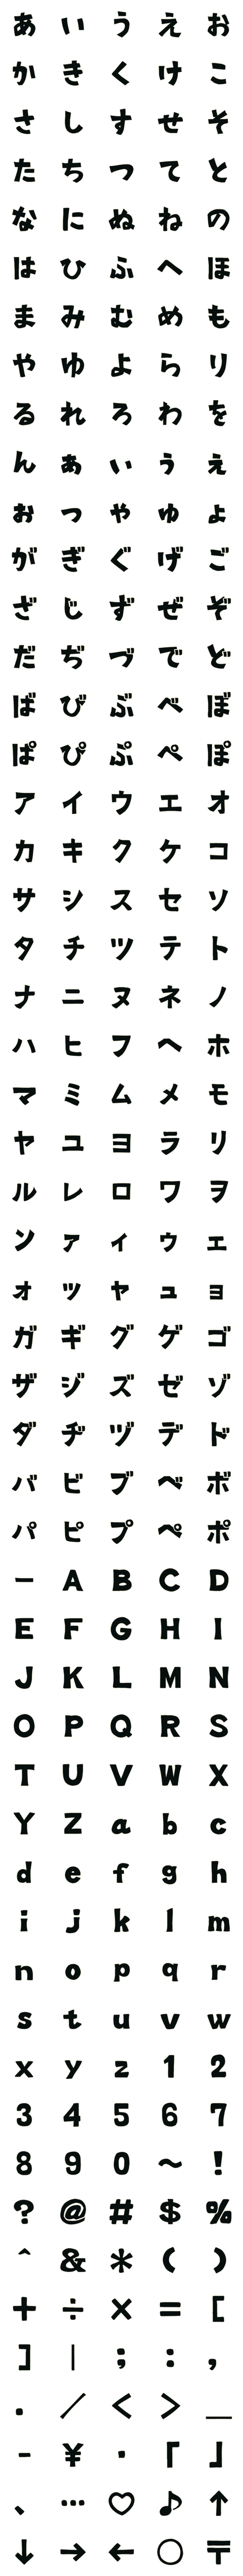 [LINE絵文字]太字の描き文字風のデコ文字（角）の画像一覧